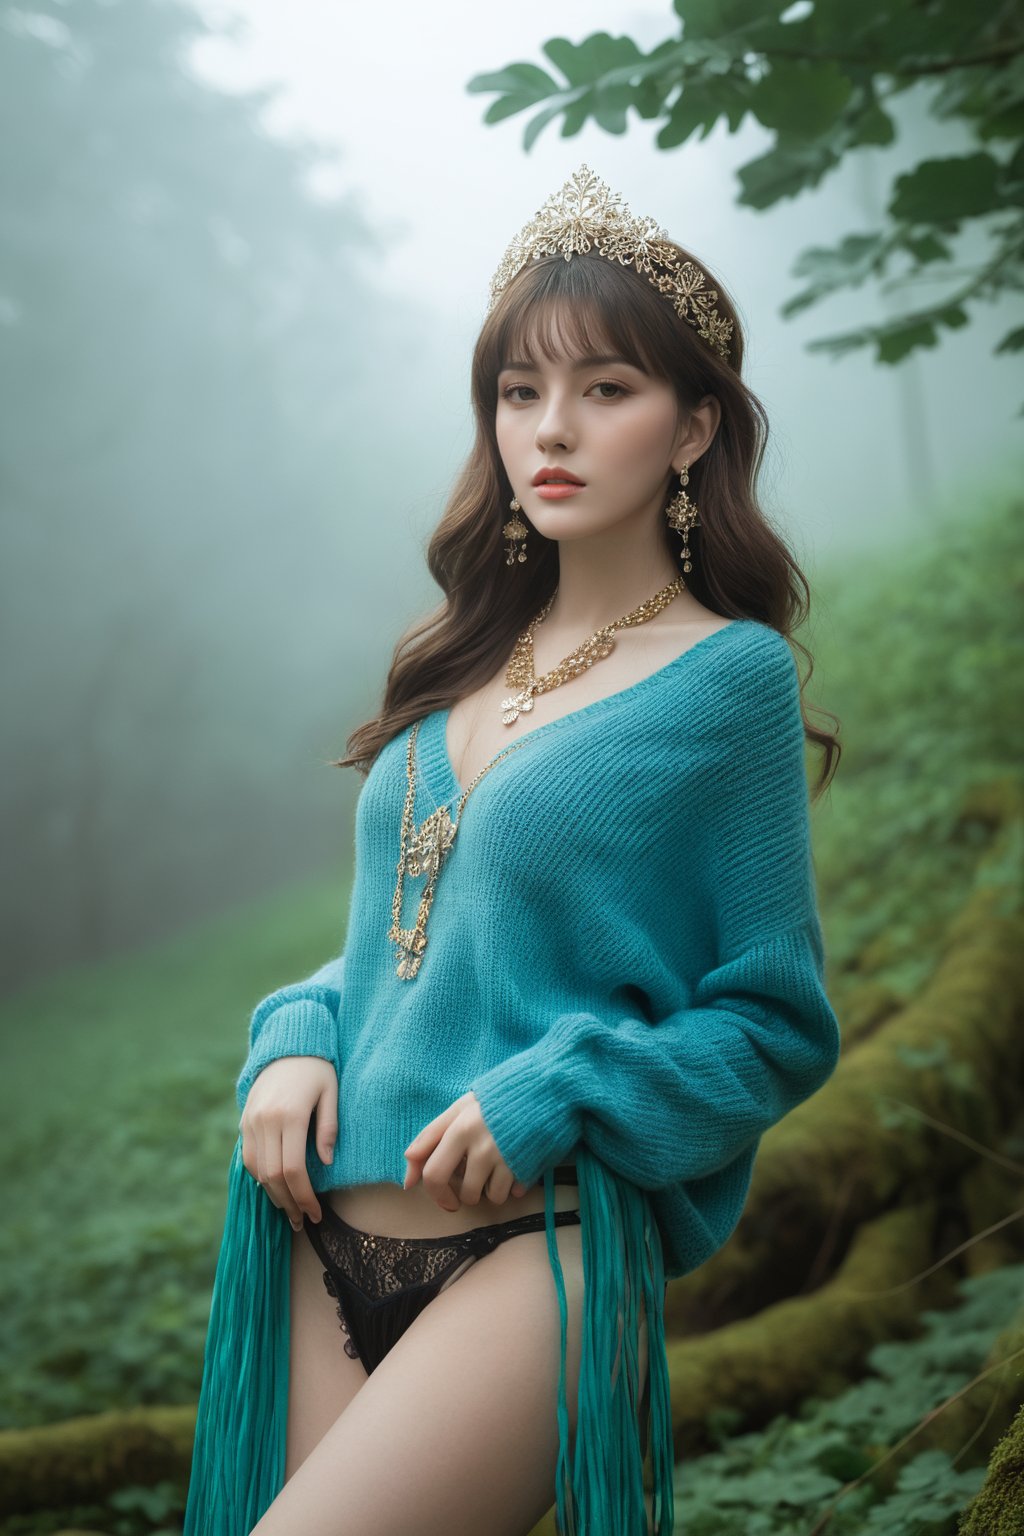  photorealistic,portrait of hubggirl, 
(ultra realistic,best quality),photorealistic,Extremely Realistic, in depth, cinematic light,

sweater,hubggirl,perfect hands, Exquisite features,Beautiful and moving,Glamorous,Flowing hair,Smoke,mist surrounds the attractive figure,hubg_jsnh, A misty forest, A sexy figure,Long,floating hair,big hair,hair strand, 

flat abdomen, crystal_earrings,headwear,
clover_hair_ornament,jewelry_necklace,tassel,arm_garter,pendant,

perfect hands,perfect lighting, vibrant colors, intricate details, high detailed skin, pale skin, intricate background, taken by Canon EOS,SIGMA Art Lens 35mm F1.4,ISO 200 Shutter Speed 2000,Vivid picture,